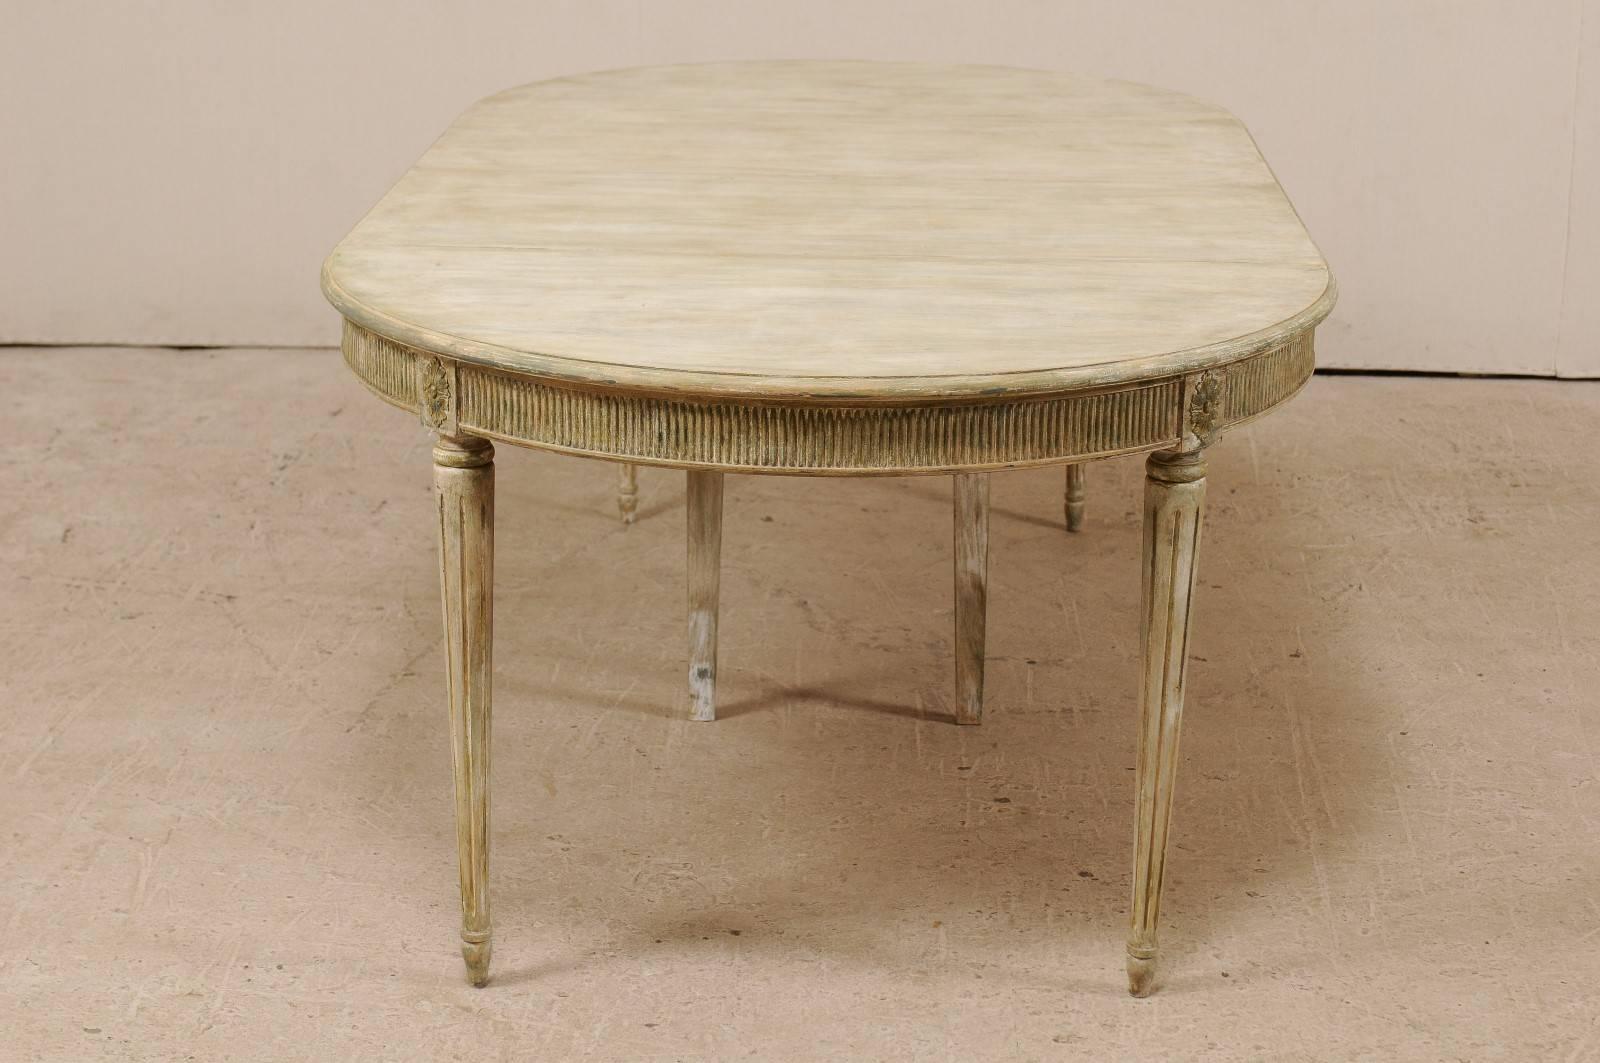 Gustavian Swedish Vintage Center / Dining Table with Two Extra Leaves (Holz)